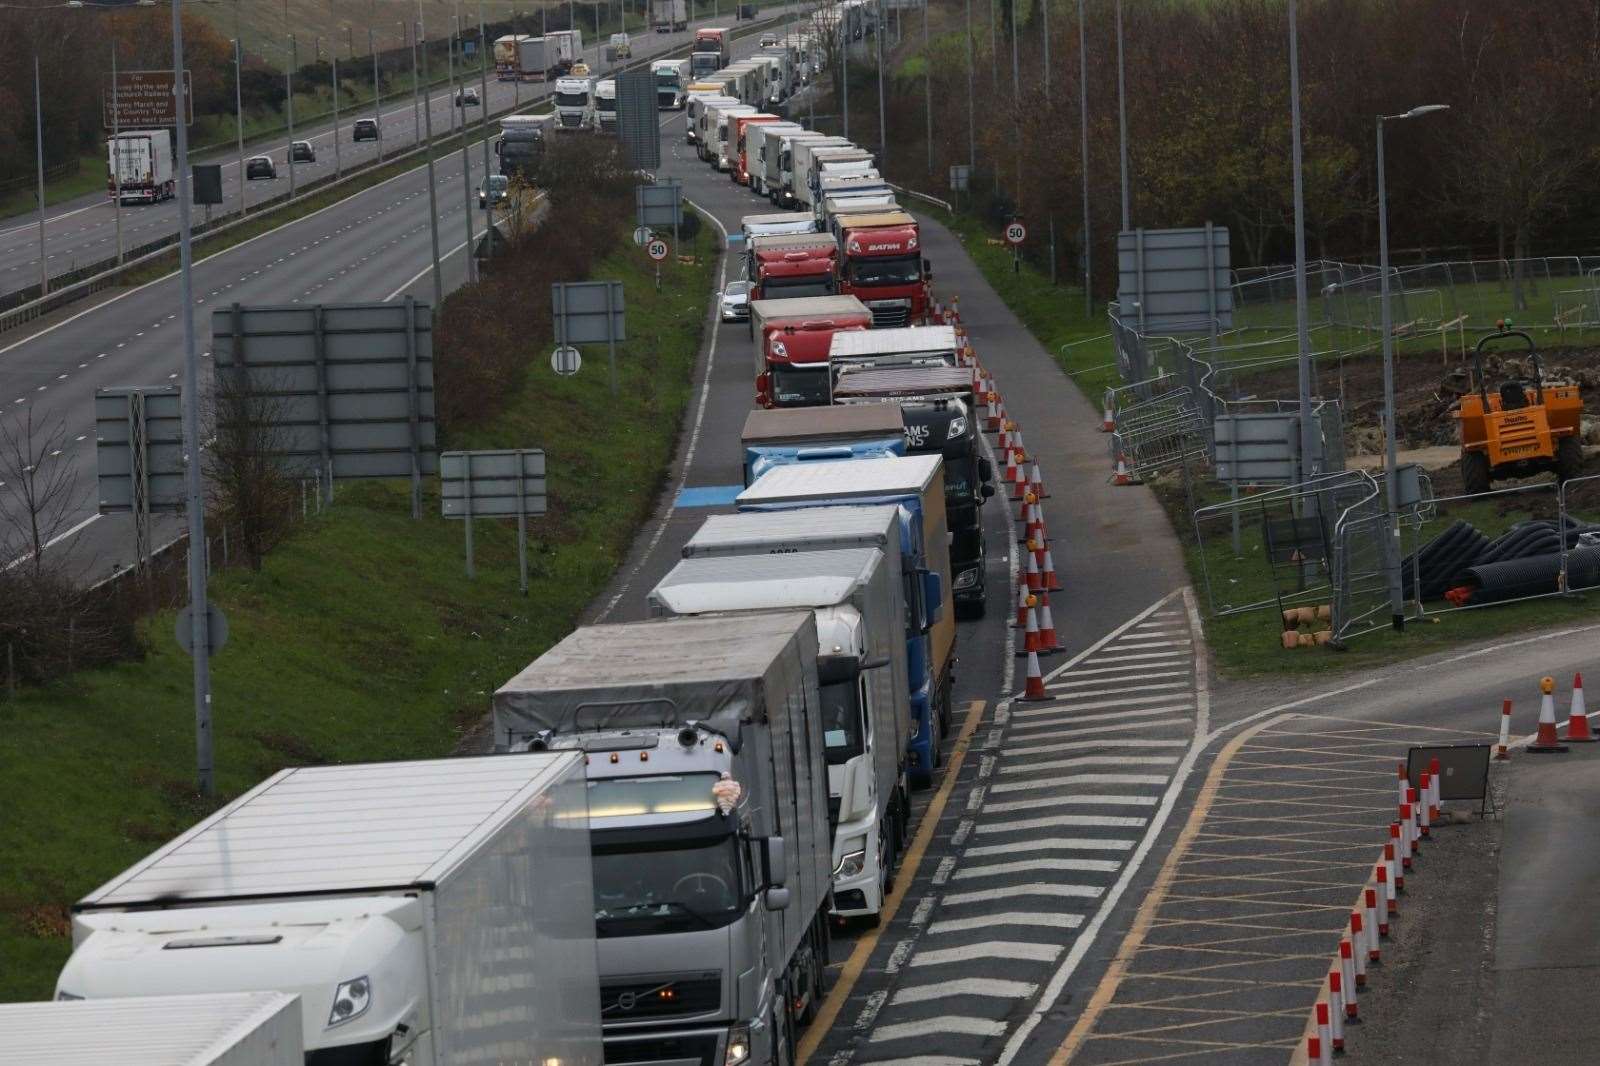 The queue of freight vehicles into Eurotunnel is stretching back to Junction 11. Picture: UKNip